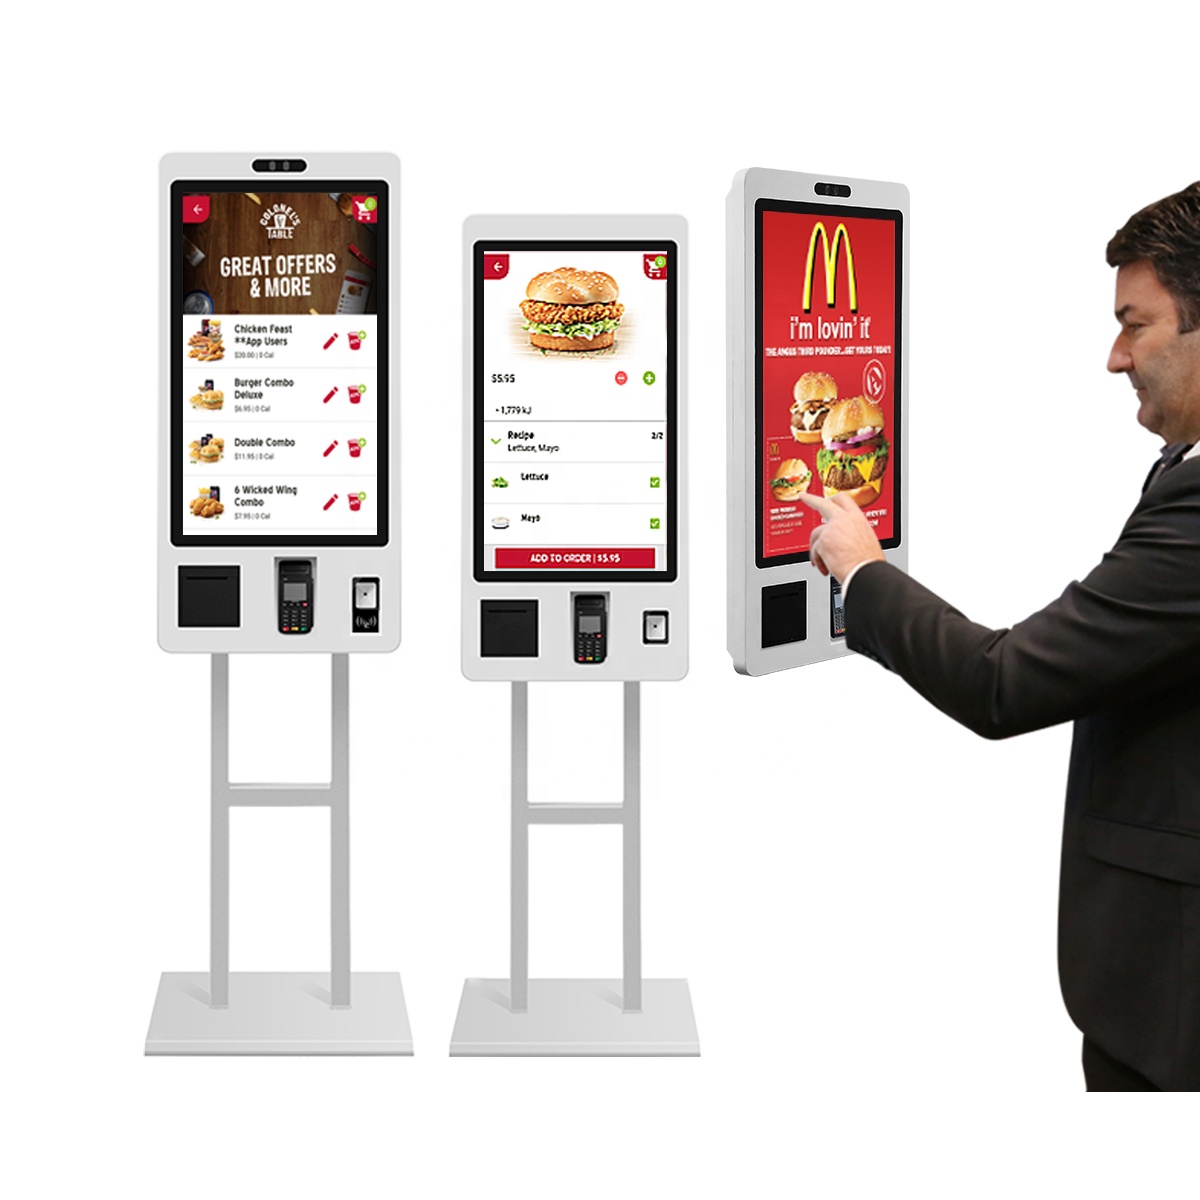 https://www.layson-display.com/32-inch-touch-screen-self-service-payment-ordering-kiosk-for-fast-food-mcdonaldskfcrestaurantssupermarket-product/